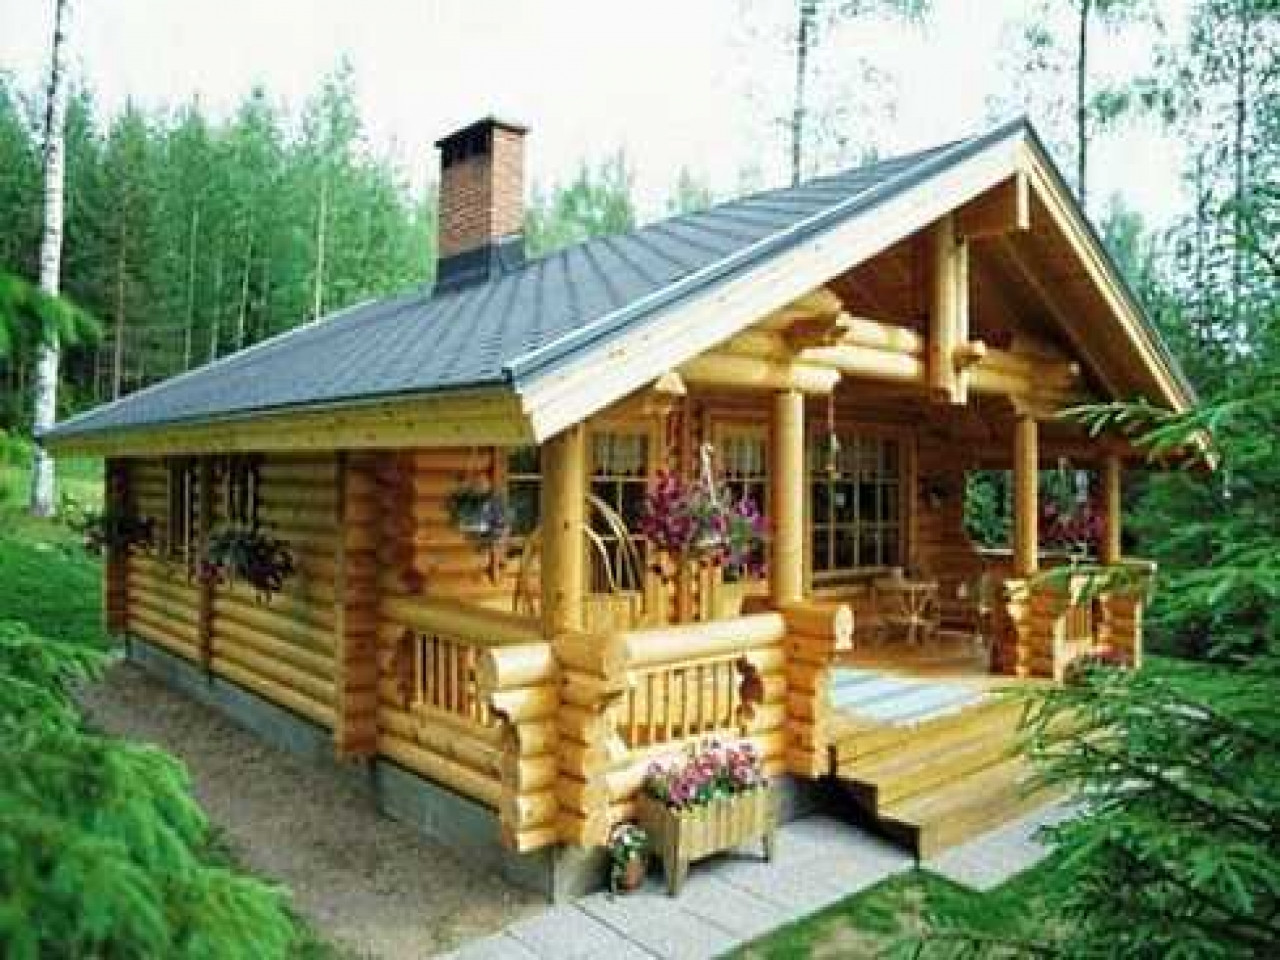 Small 2 Bedroom House
 Small Log Cabin Kit Homes Pre Built Log Cabins 2 bedroom